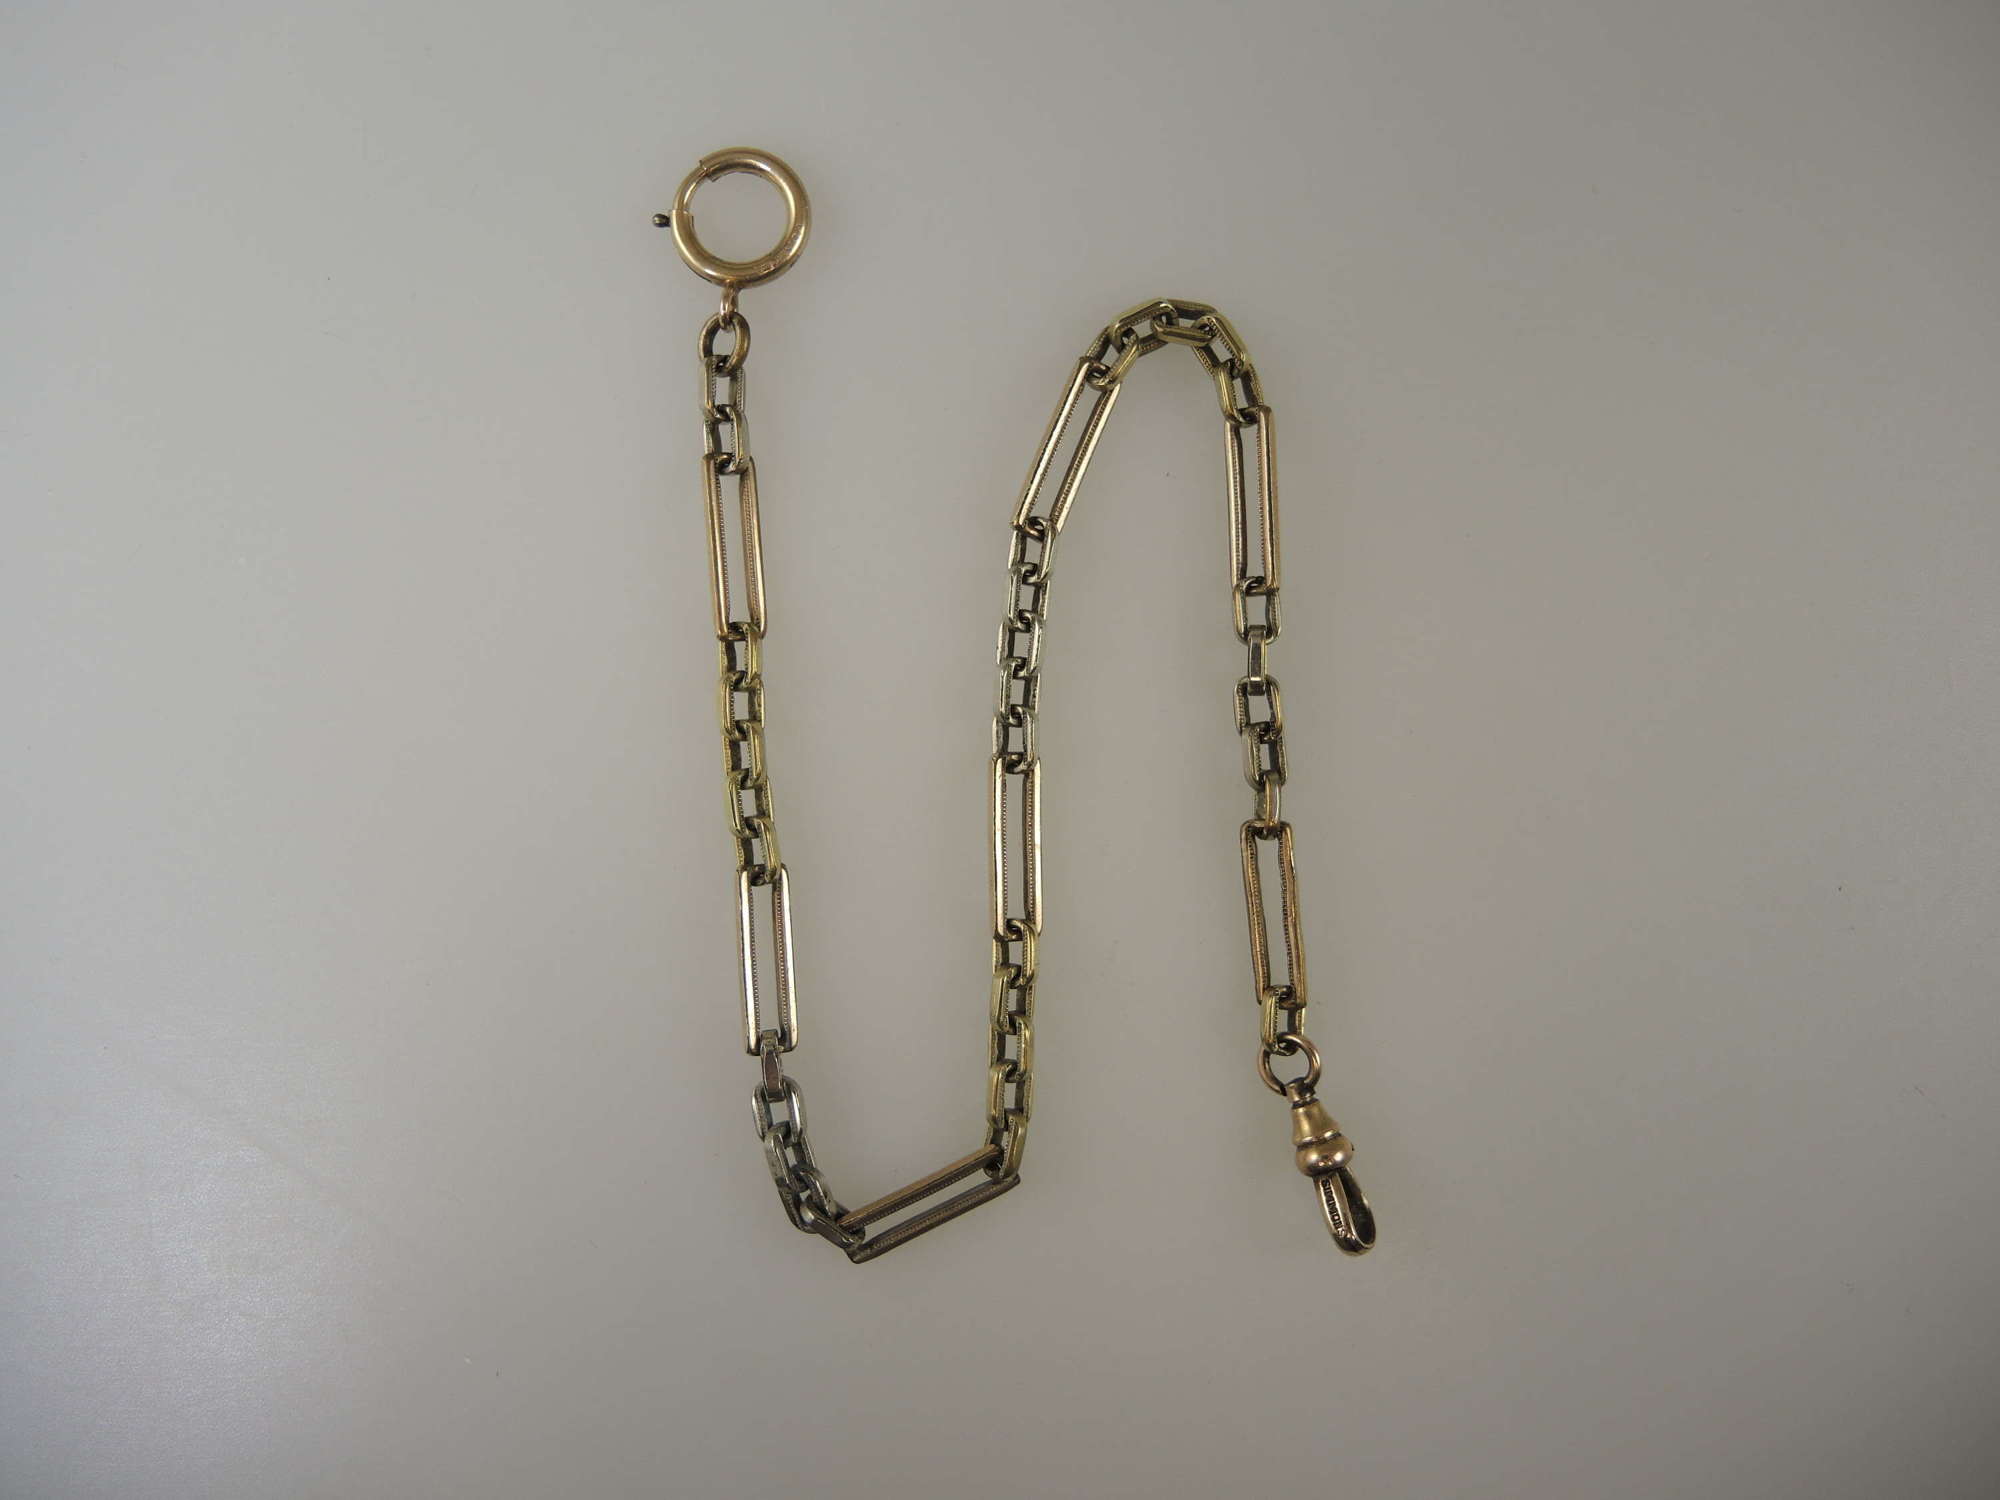 Top quality 3 colour gold filled watch chain c1910